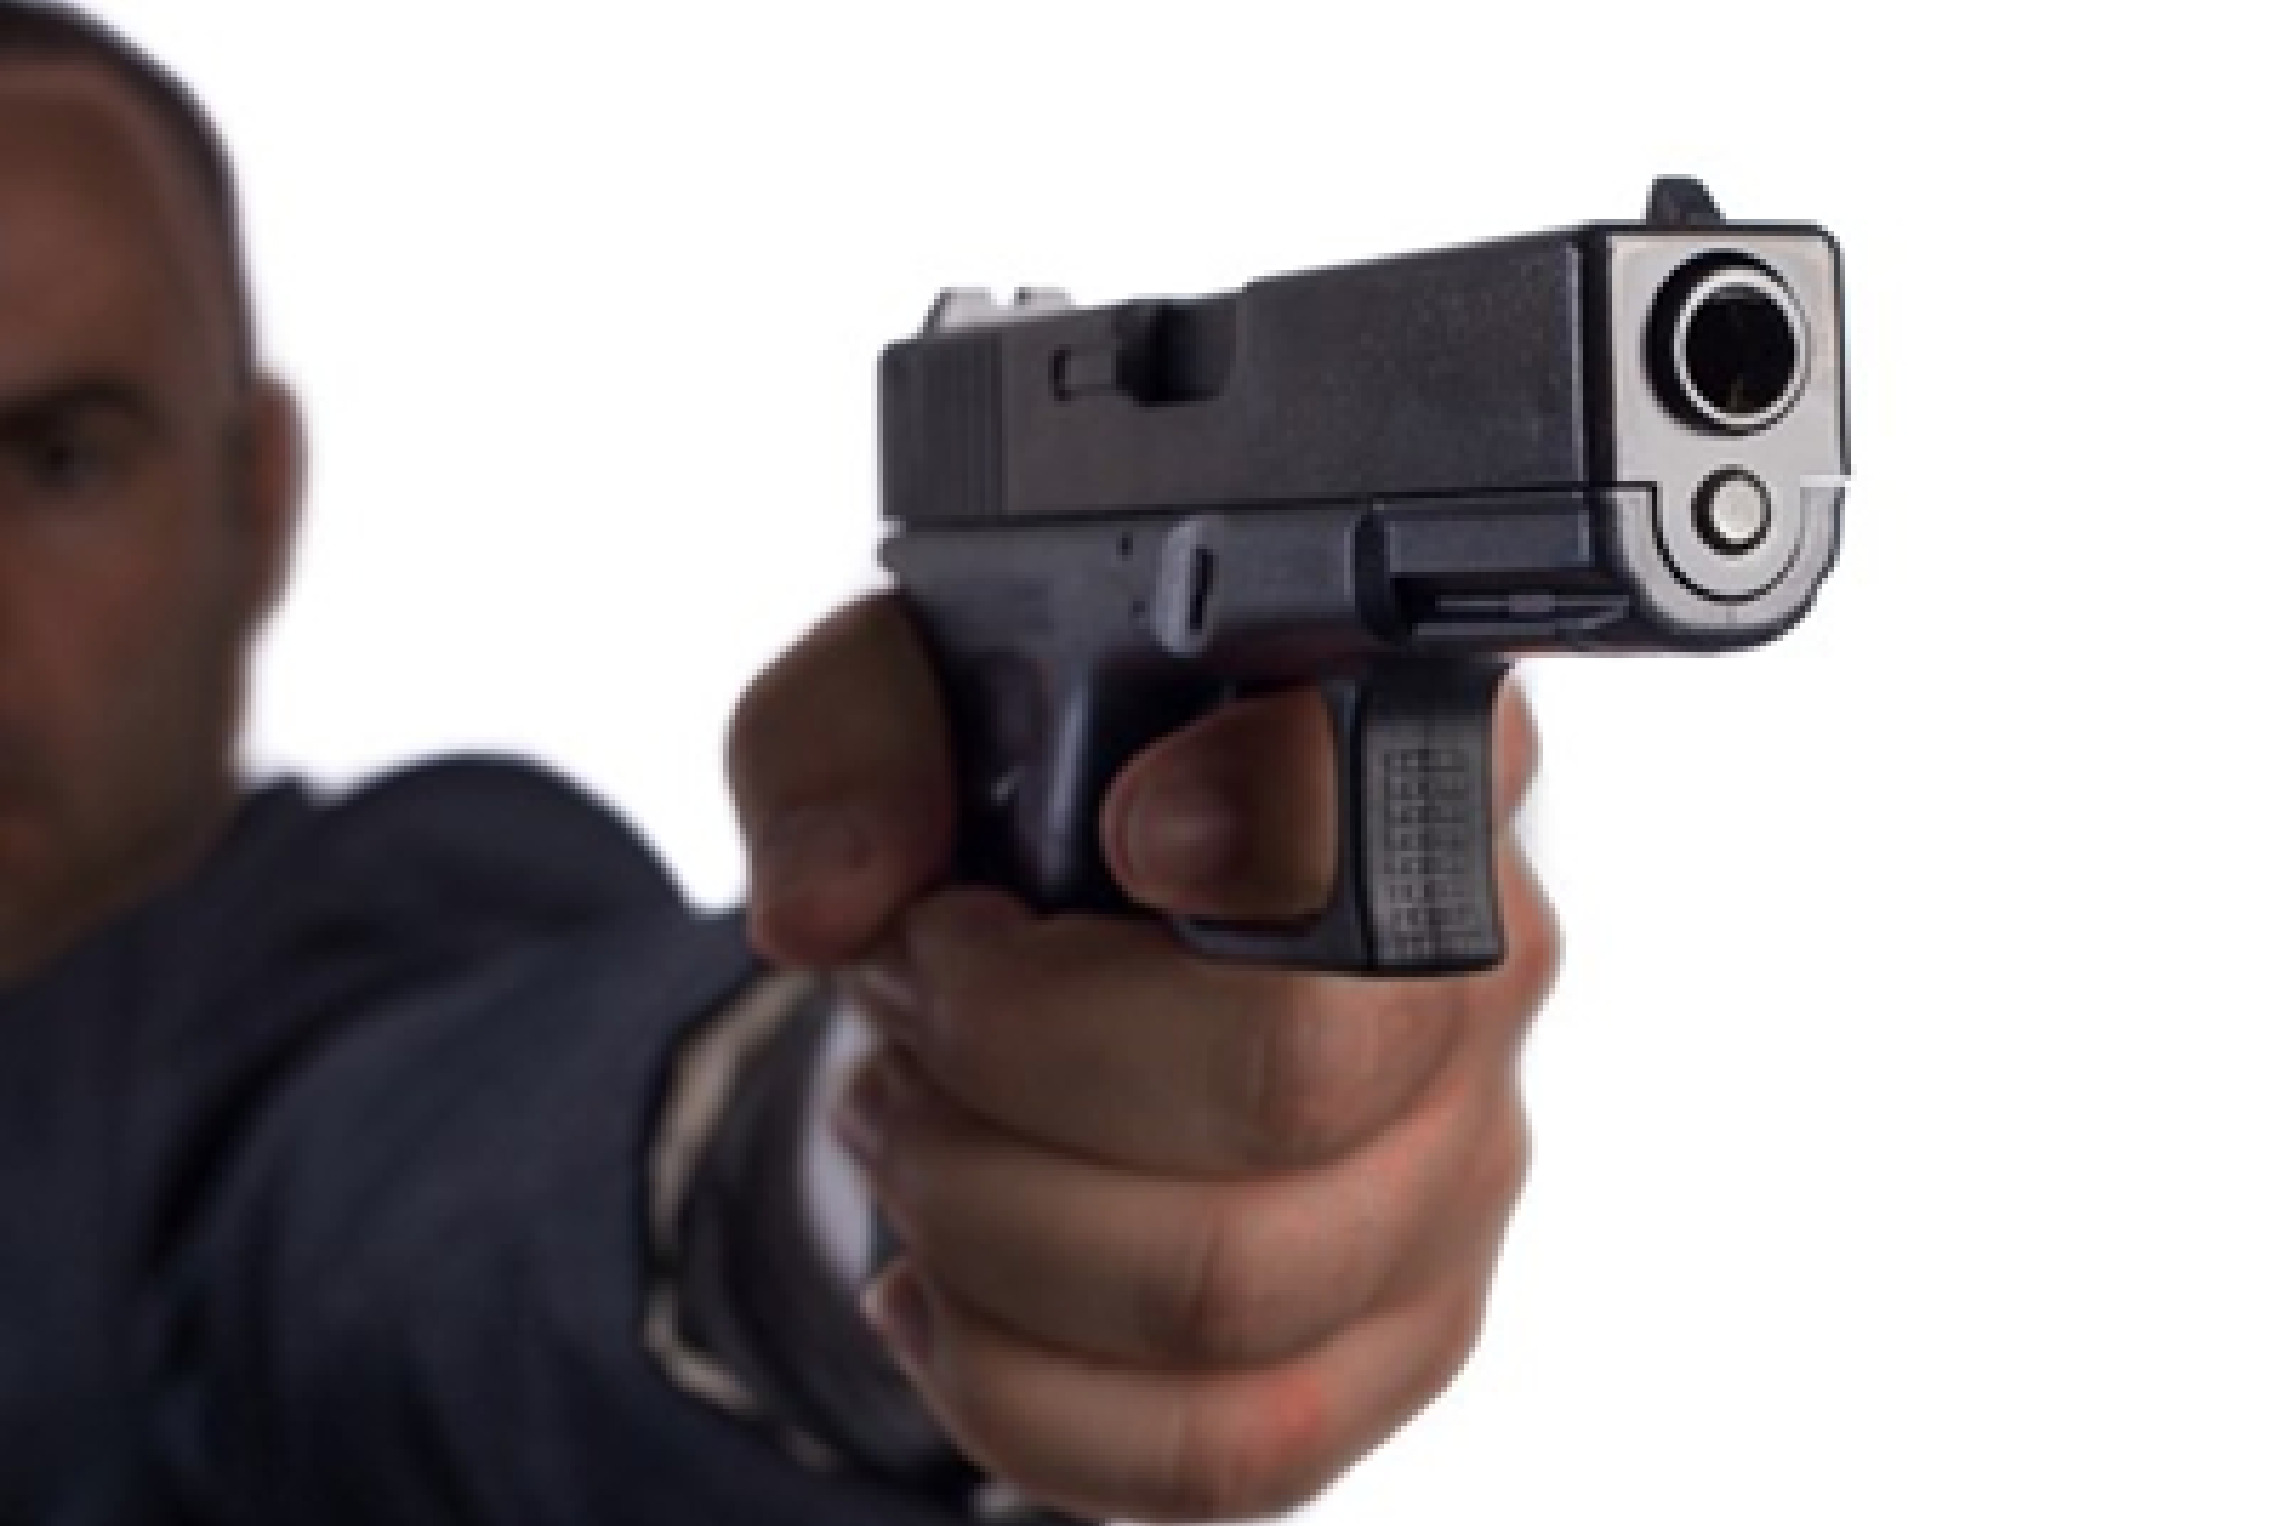 Image used in KU gun regulation study that specifically shows a dark-skinned man pointing a gun.